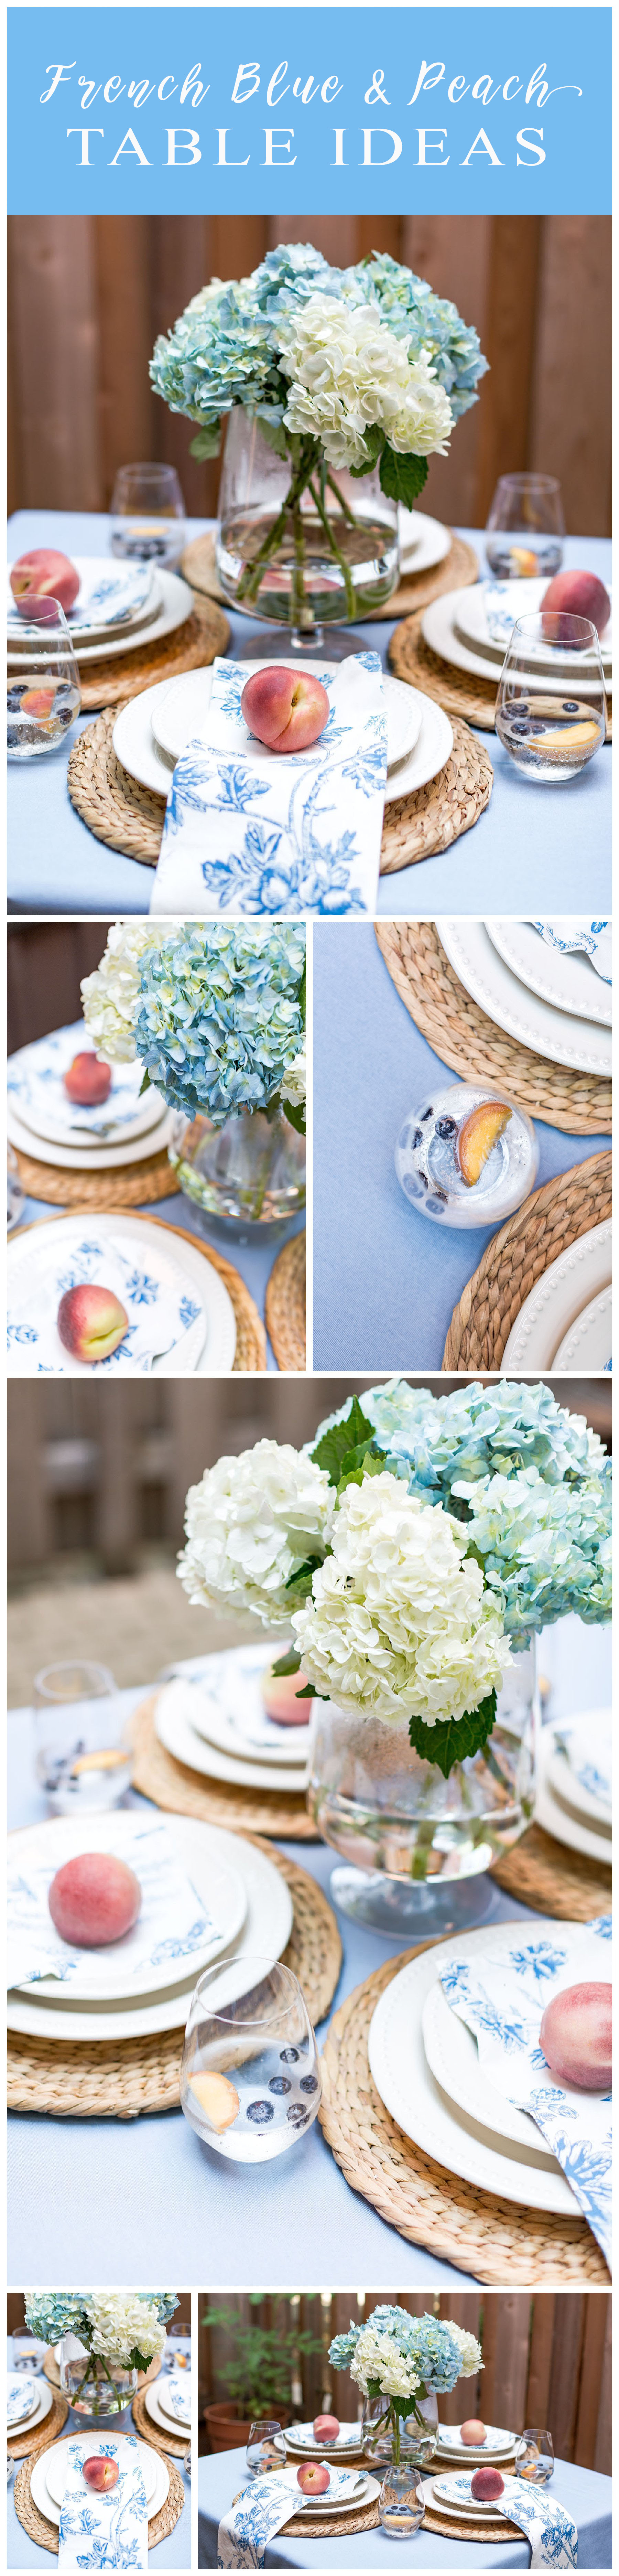 French Blue and Peach Tablescape Ideas and Inspiration